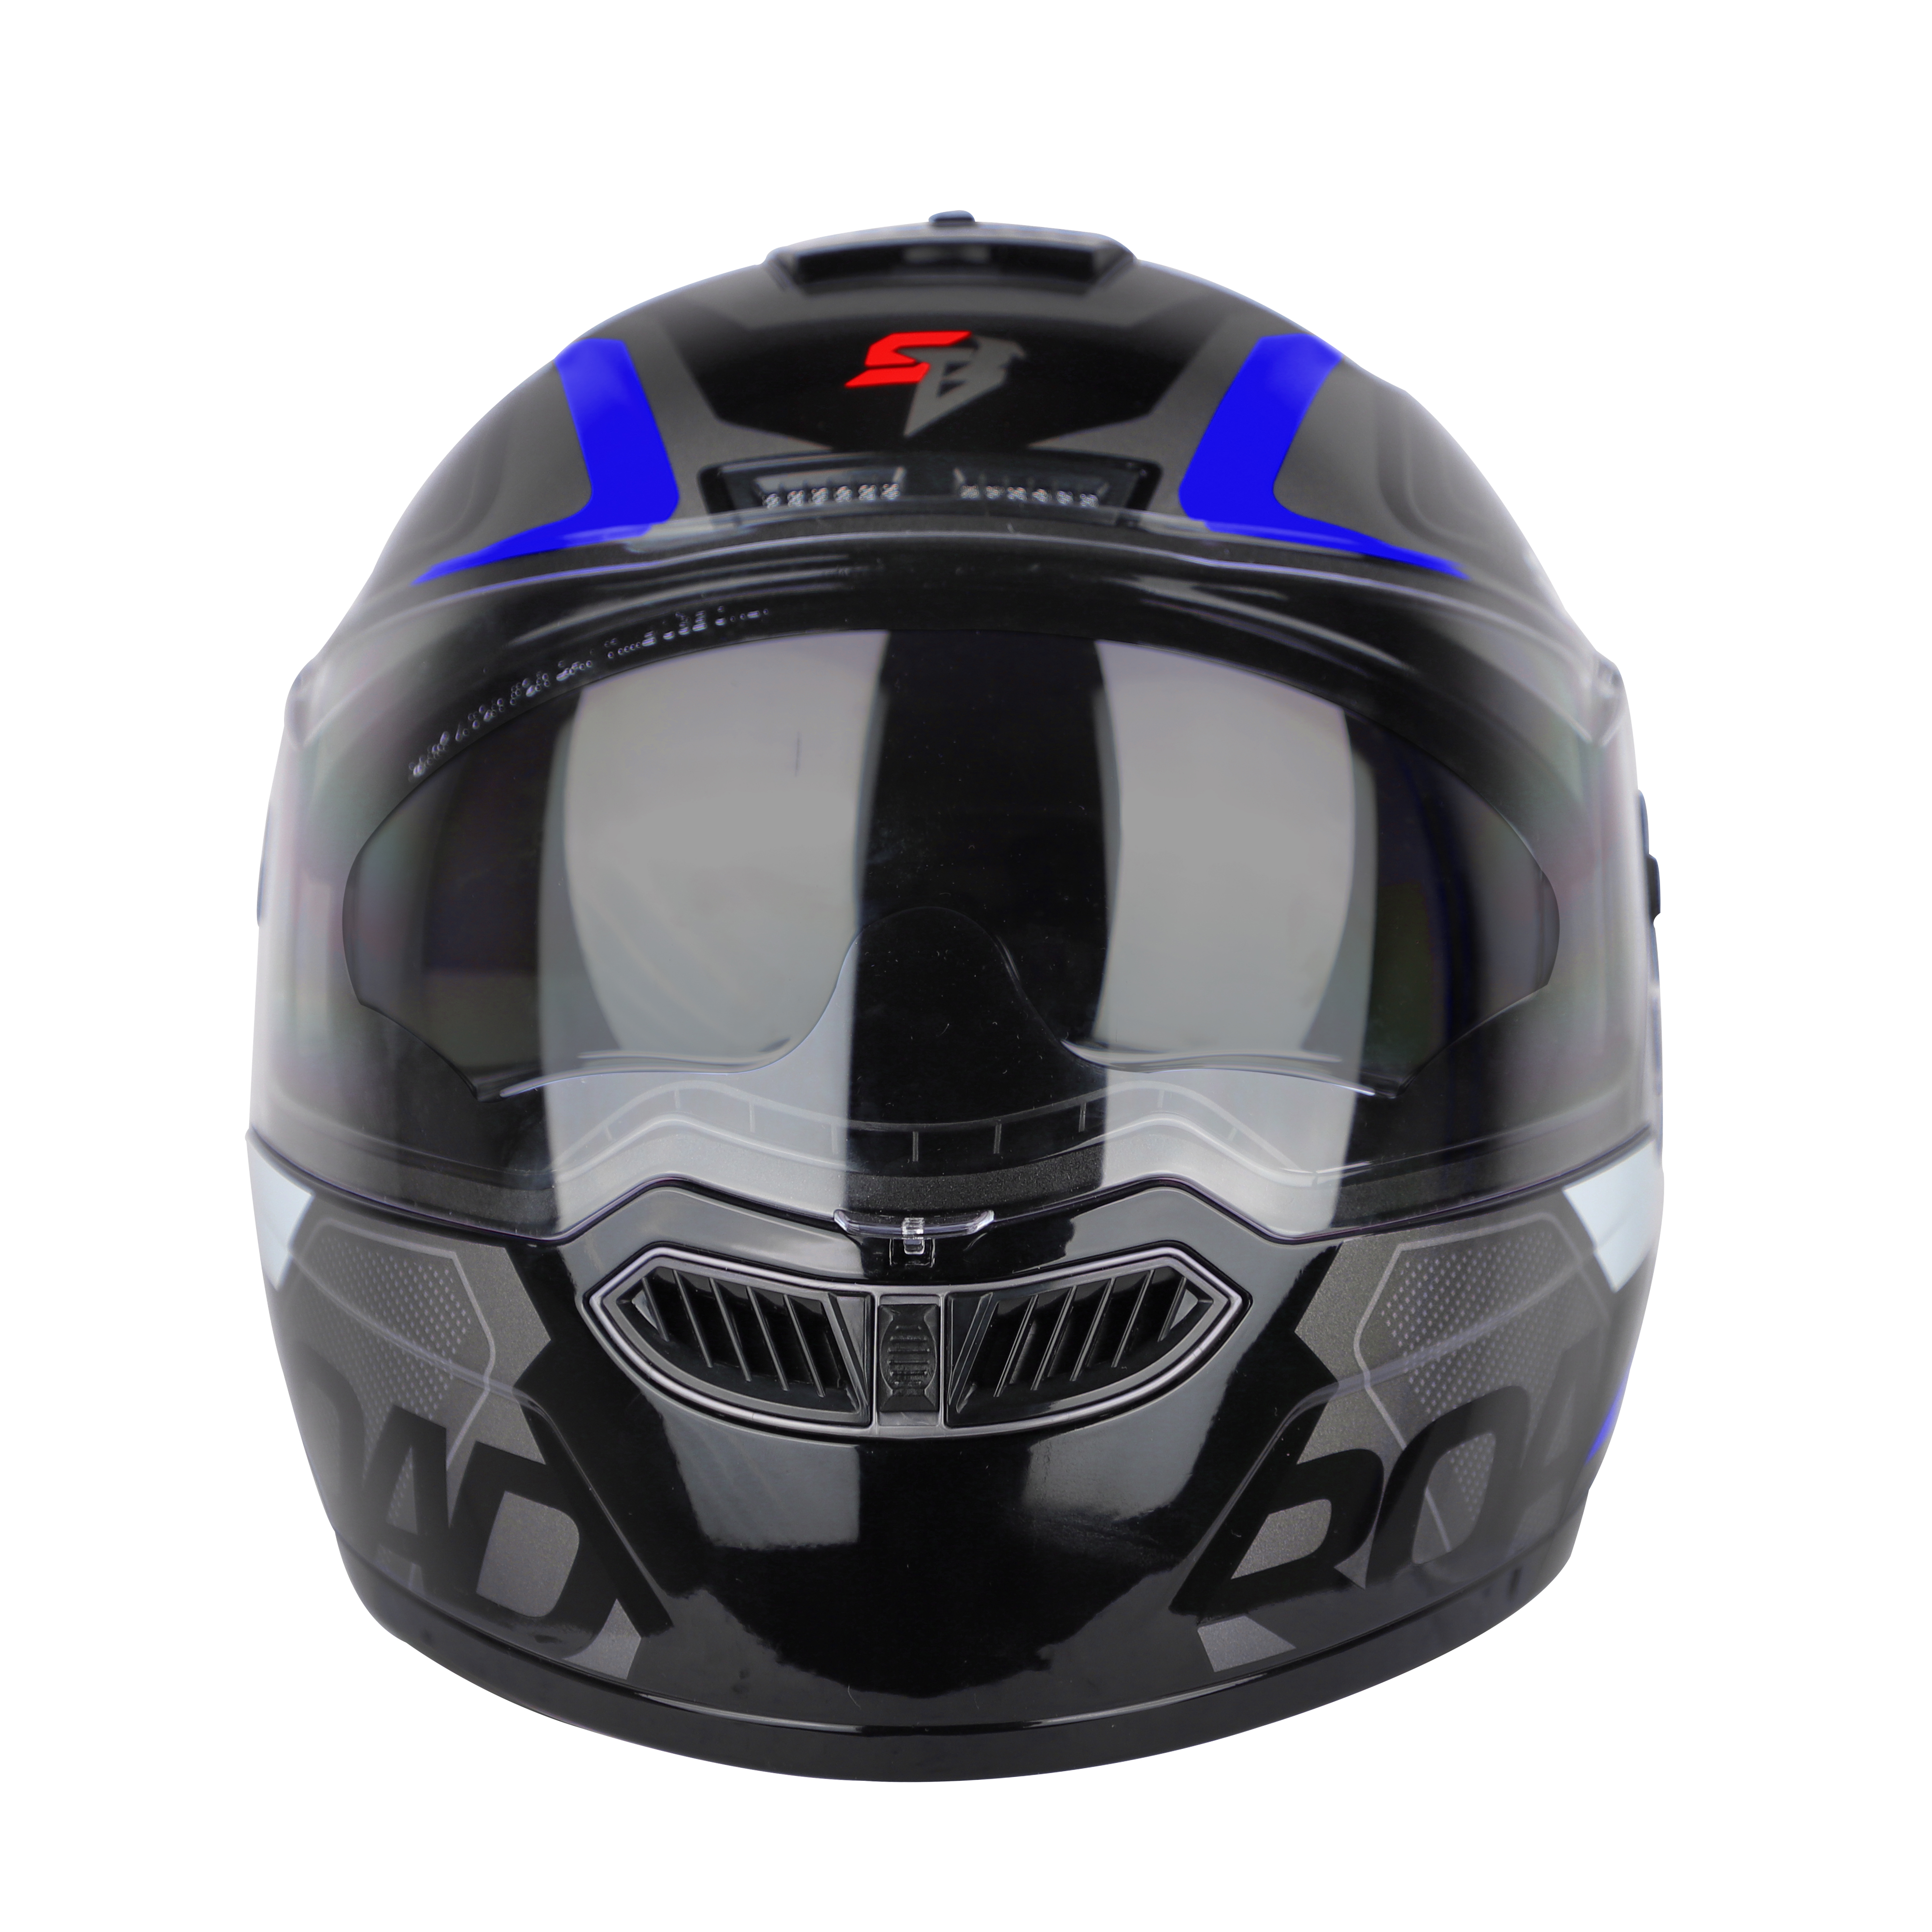 SBA-7 ROAD GLOSSY  BLACK WITH BLUE (WITH INNER SUNSHIELD)